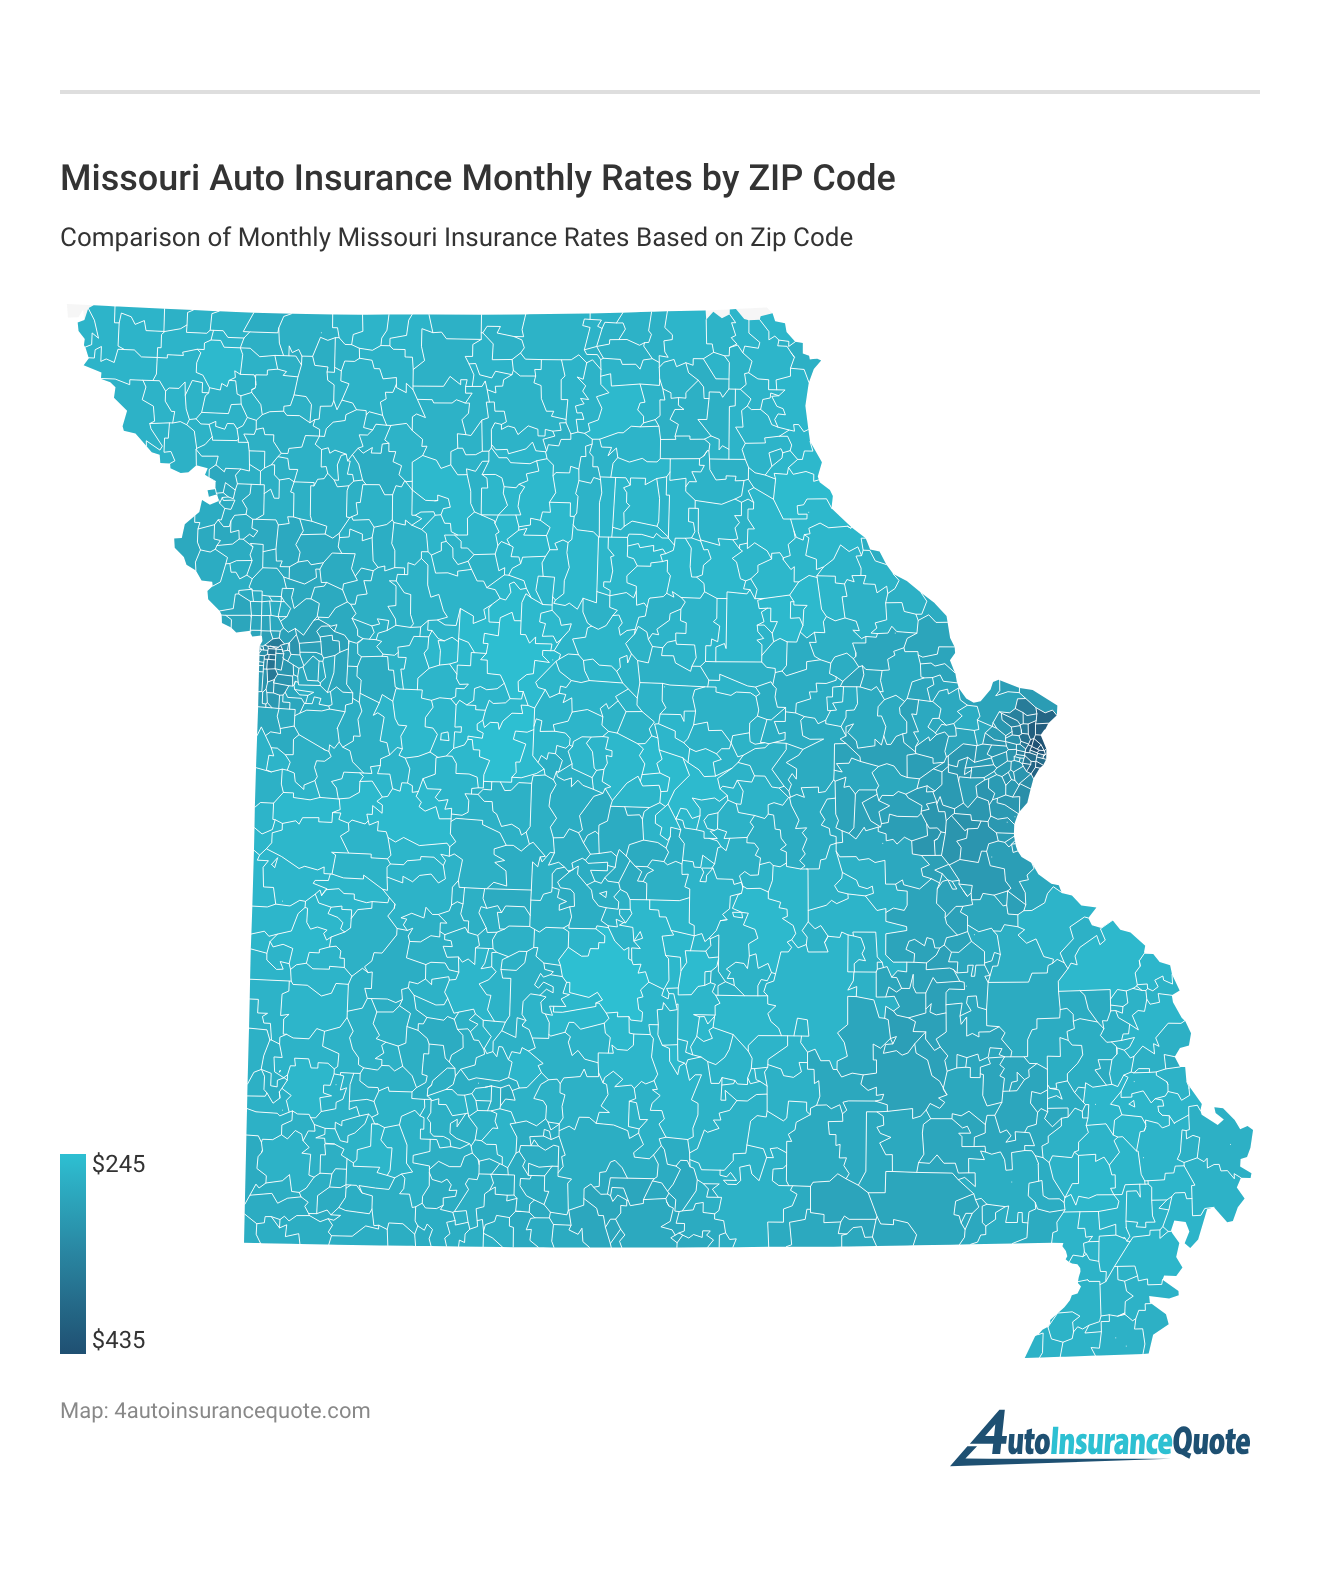 <h3>Missouri Auto Insurance Monthly Rates by ZIP Code</h3>